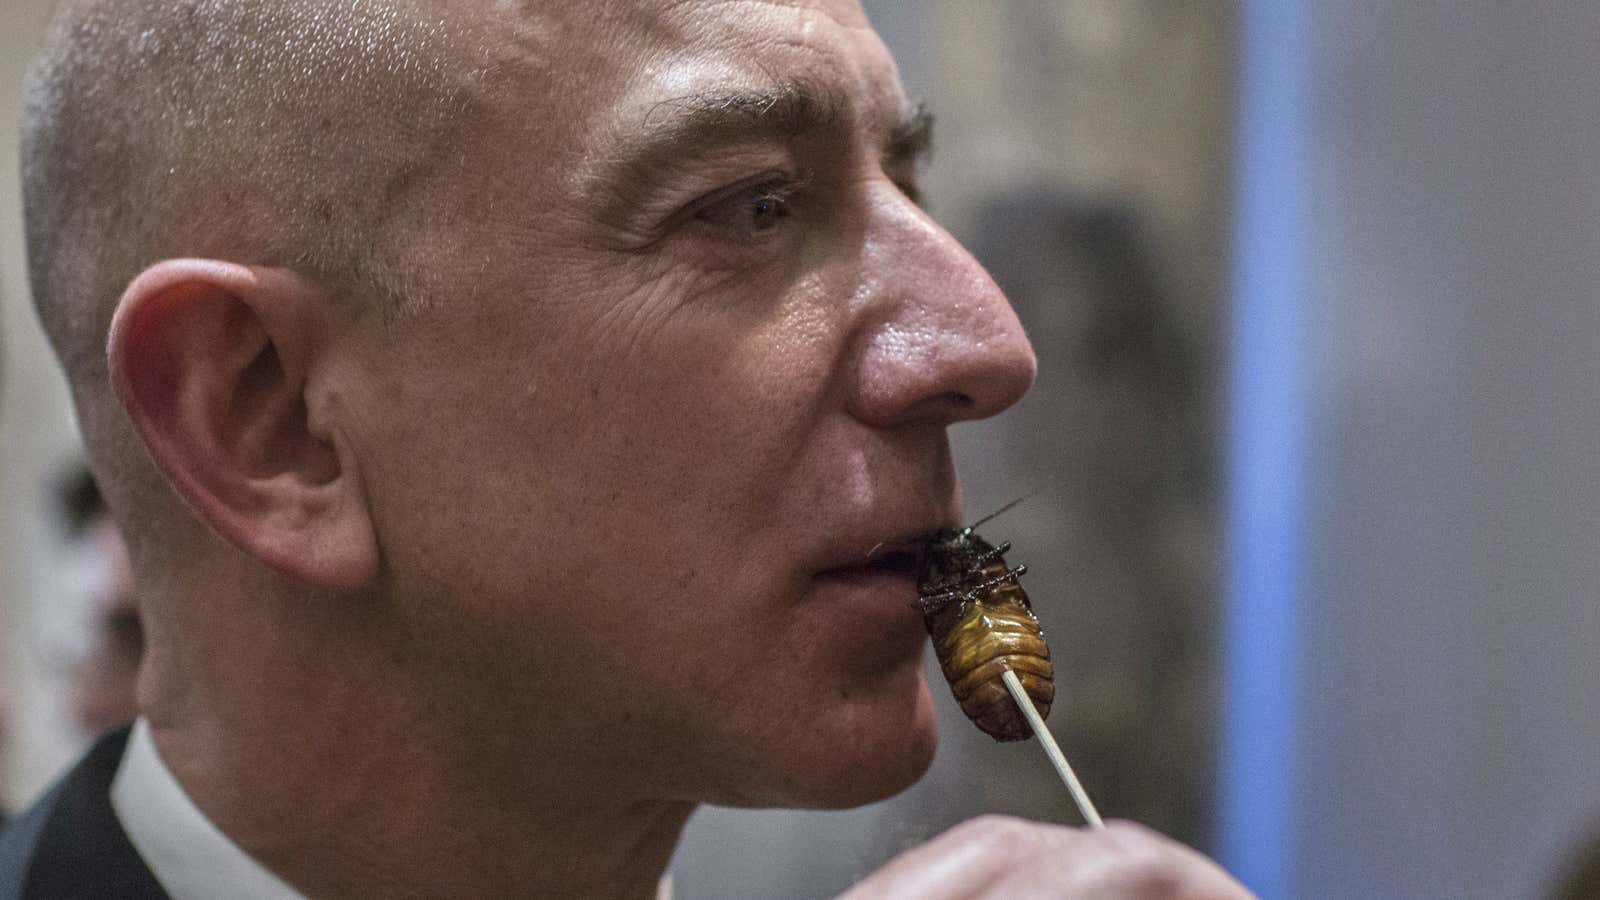 Jeff Bezos says compromising with coworkers is actually a bad idea